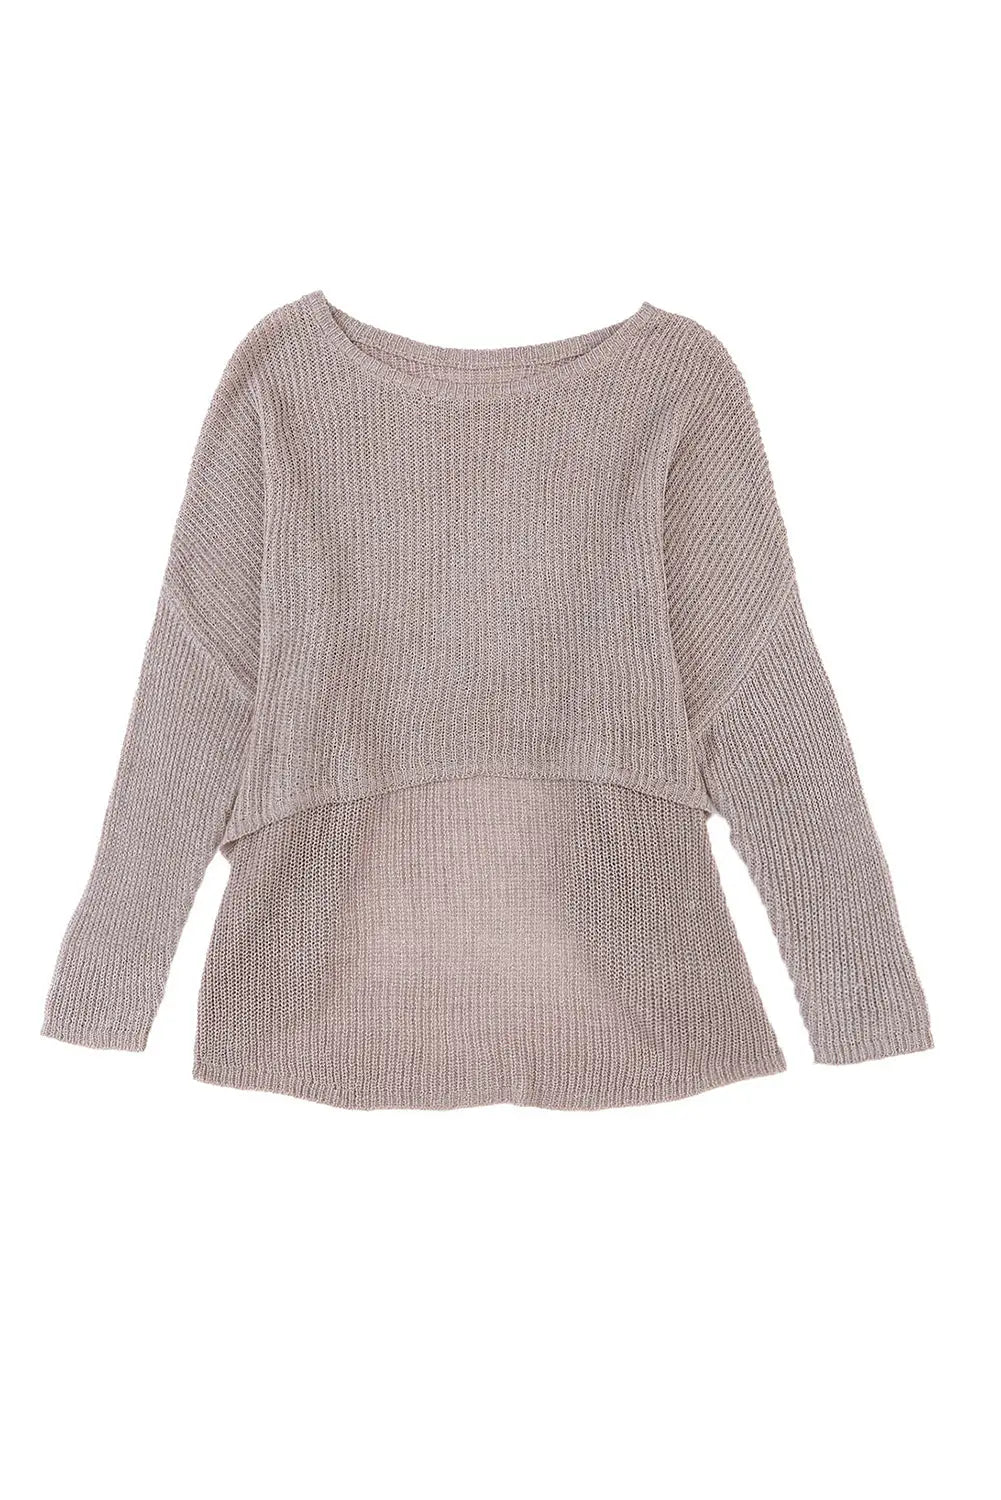 Pirouette slouchy dolman sleeve high low sweater - & cardigans